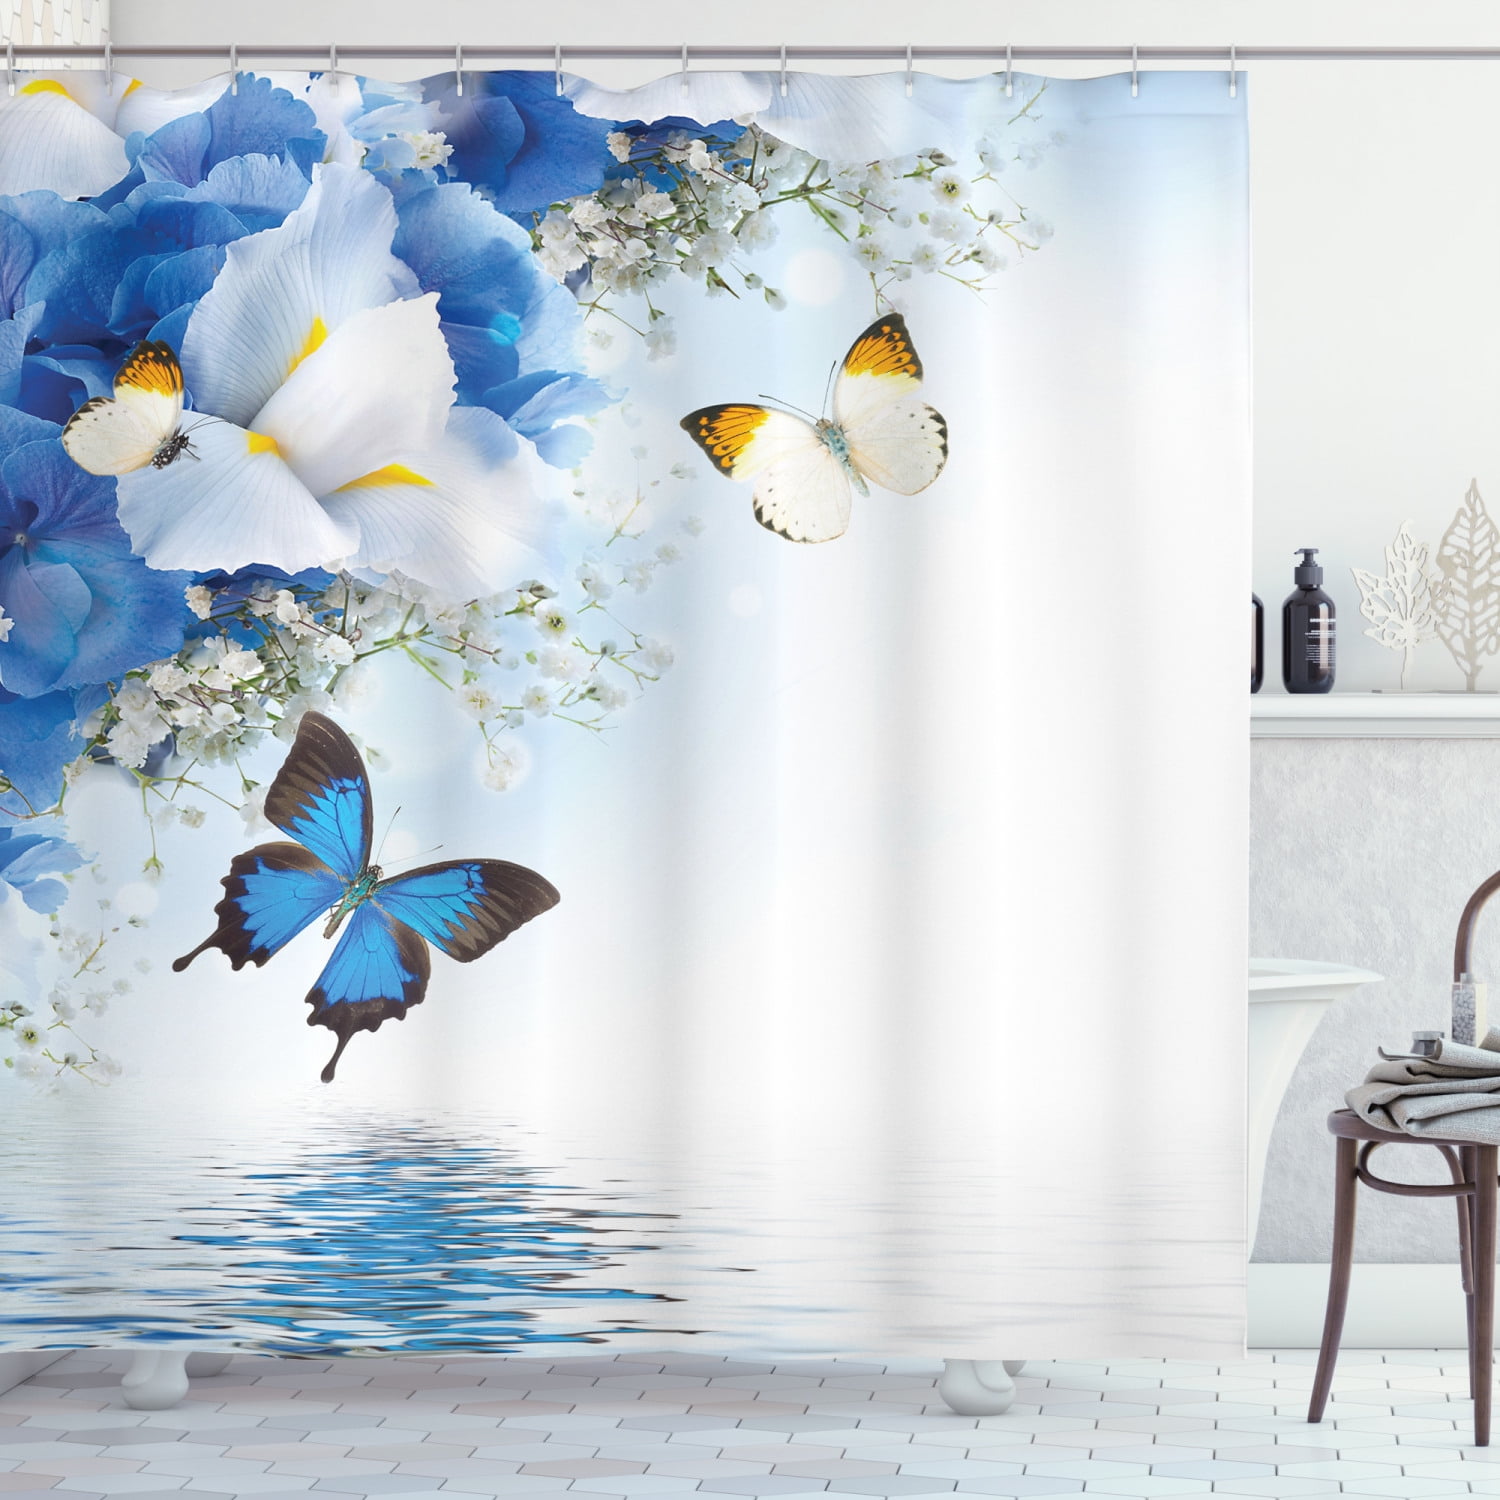 Romantic Flower and Butterfly Shower Curtain Bathroom Waterproof Fabric & Hooks 